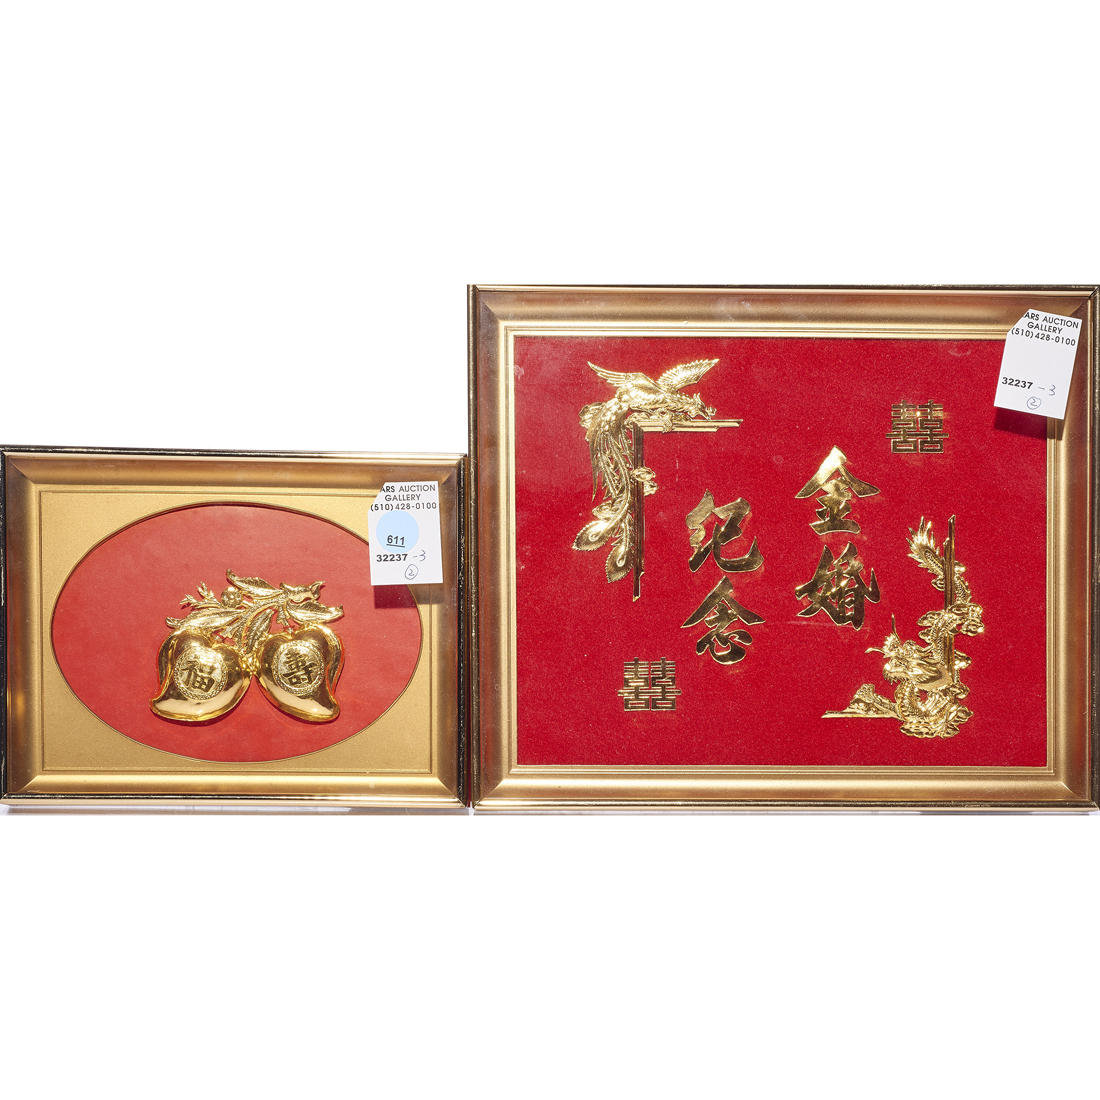  LOT OF 2 CHINESE GOLD FOIL PICTURES 3a2200